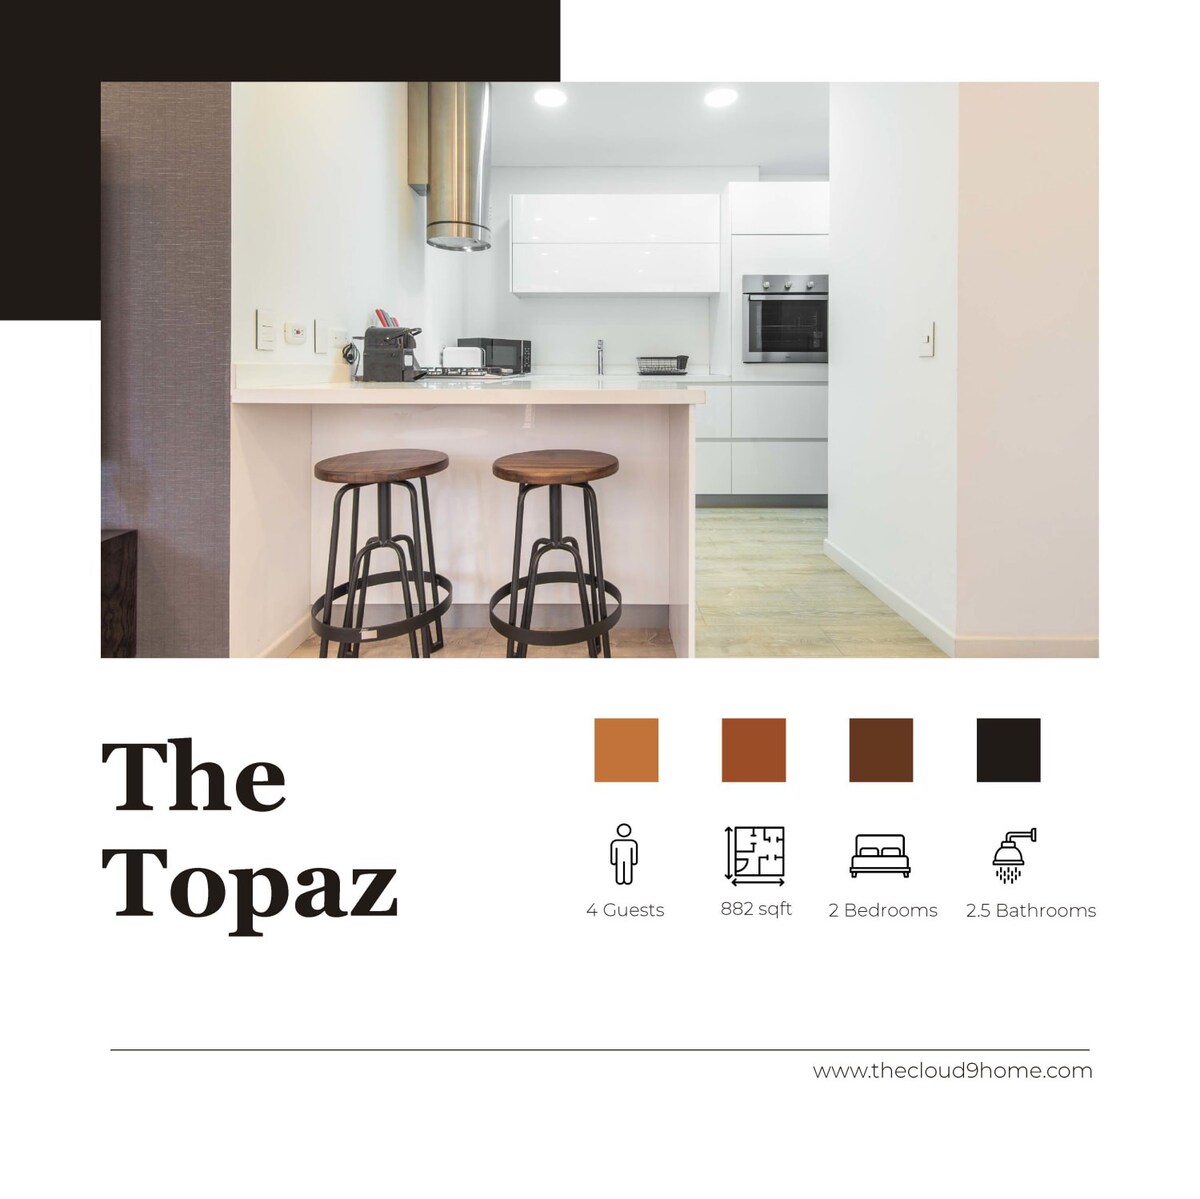 Property Image 2 - Full Amenities & VIP Location | The Topaz